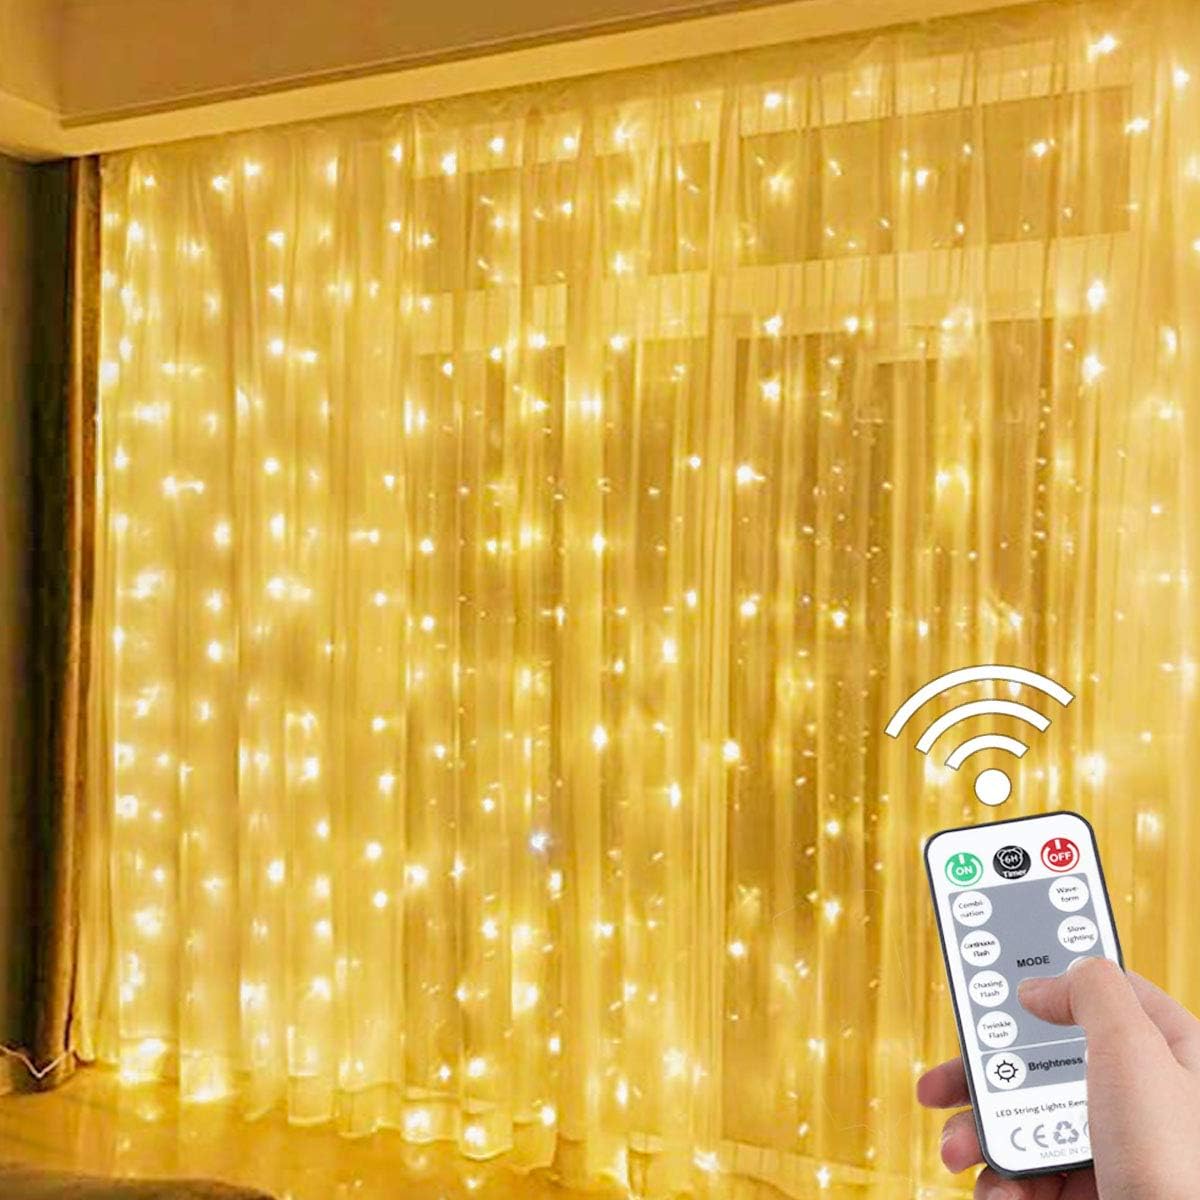 SUWITU Fairy Curtain Lights for Bedroom 300 LED, Christmas String Lights USB Plug in 8 Modes Wall Hanging Twinkle with Remote Control for in/Outdoor Wedding Party Backdrop Decor(9.8x9.8FT)